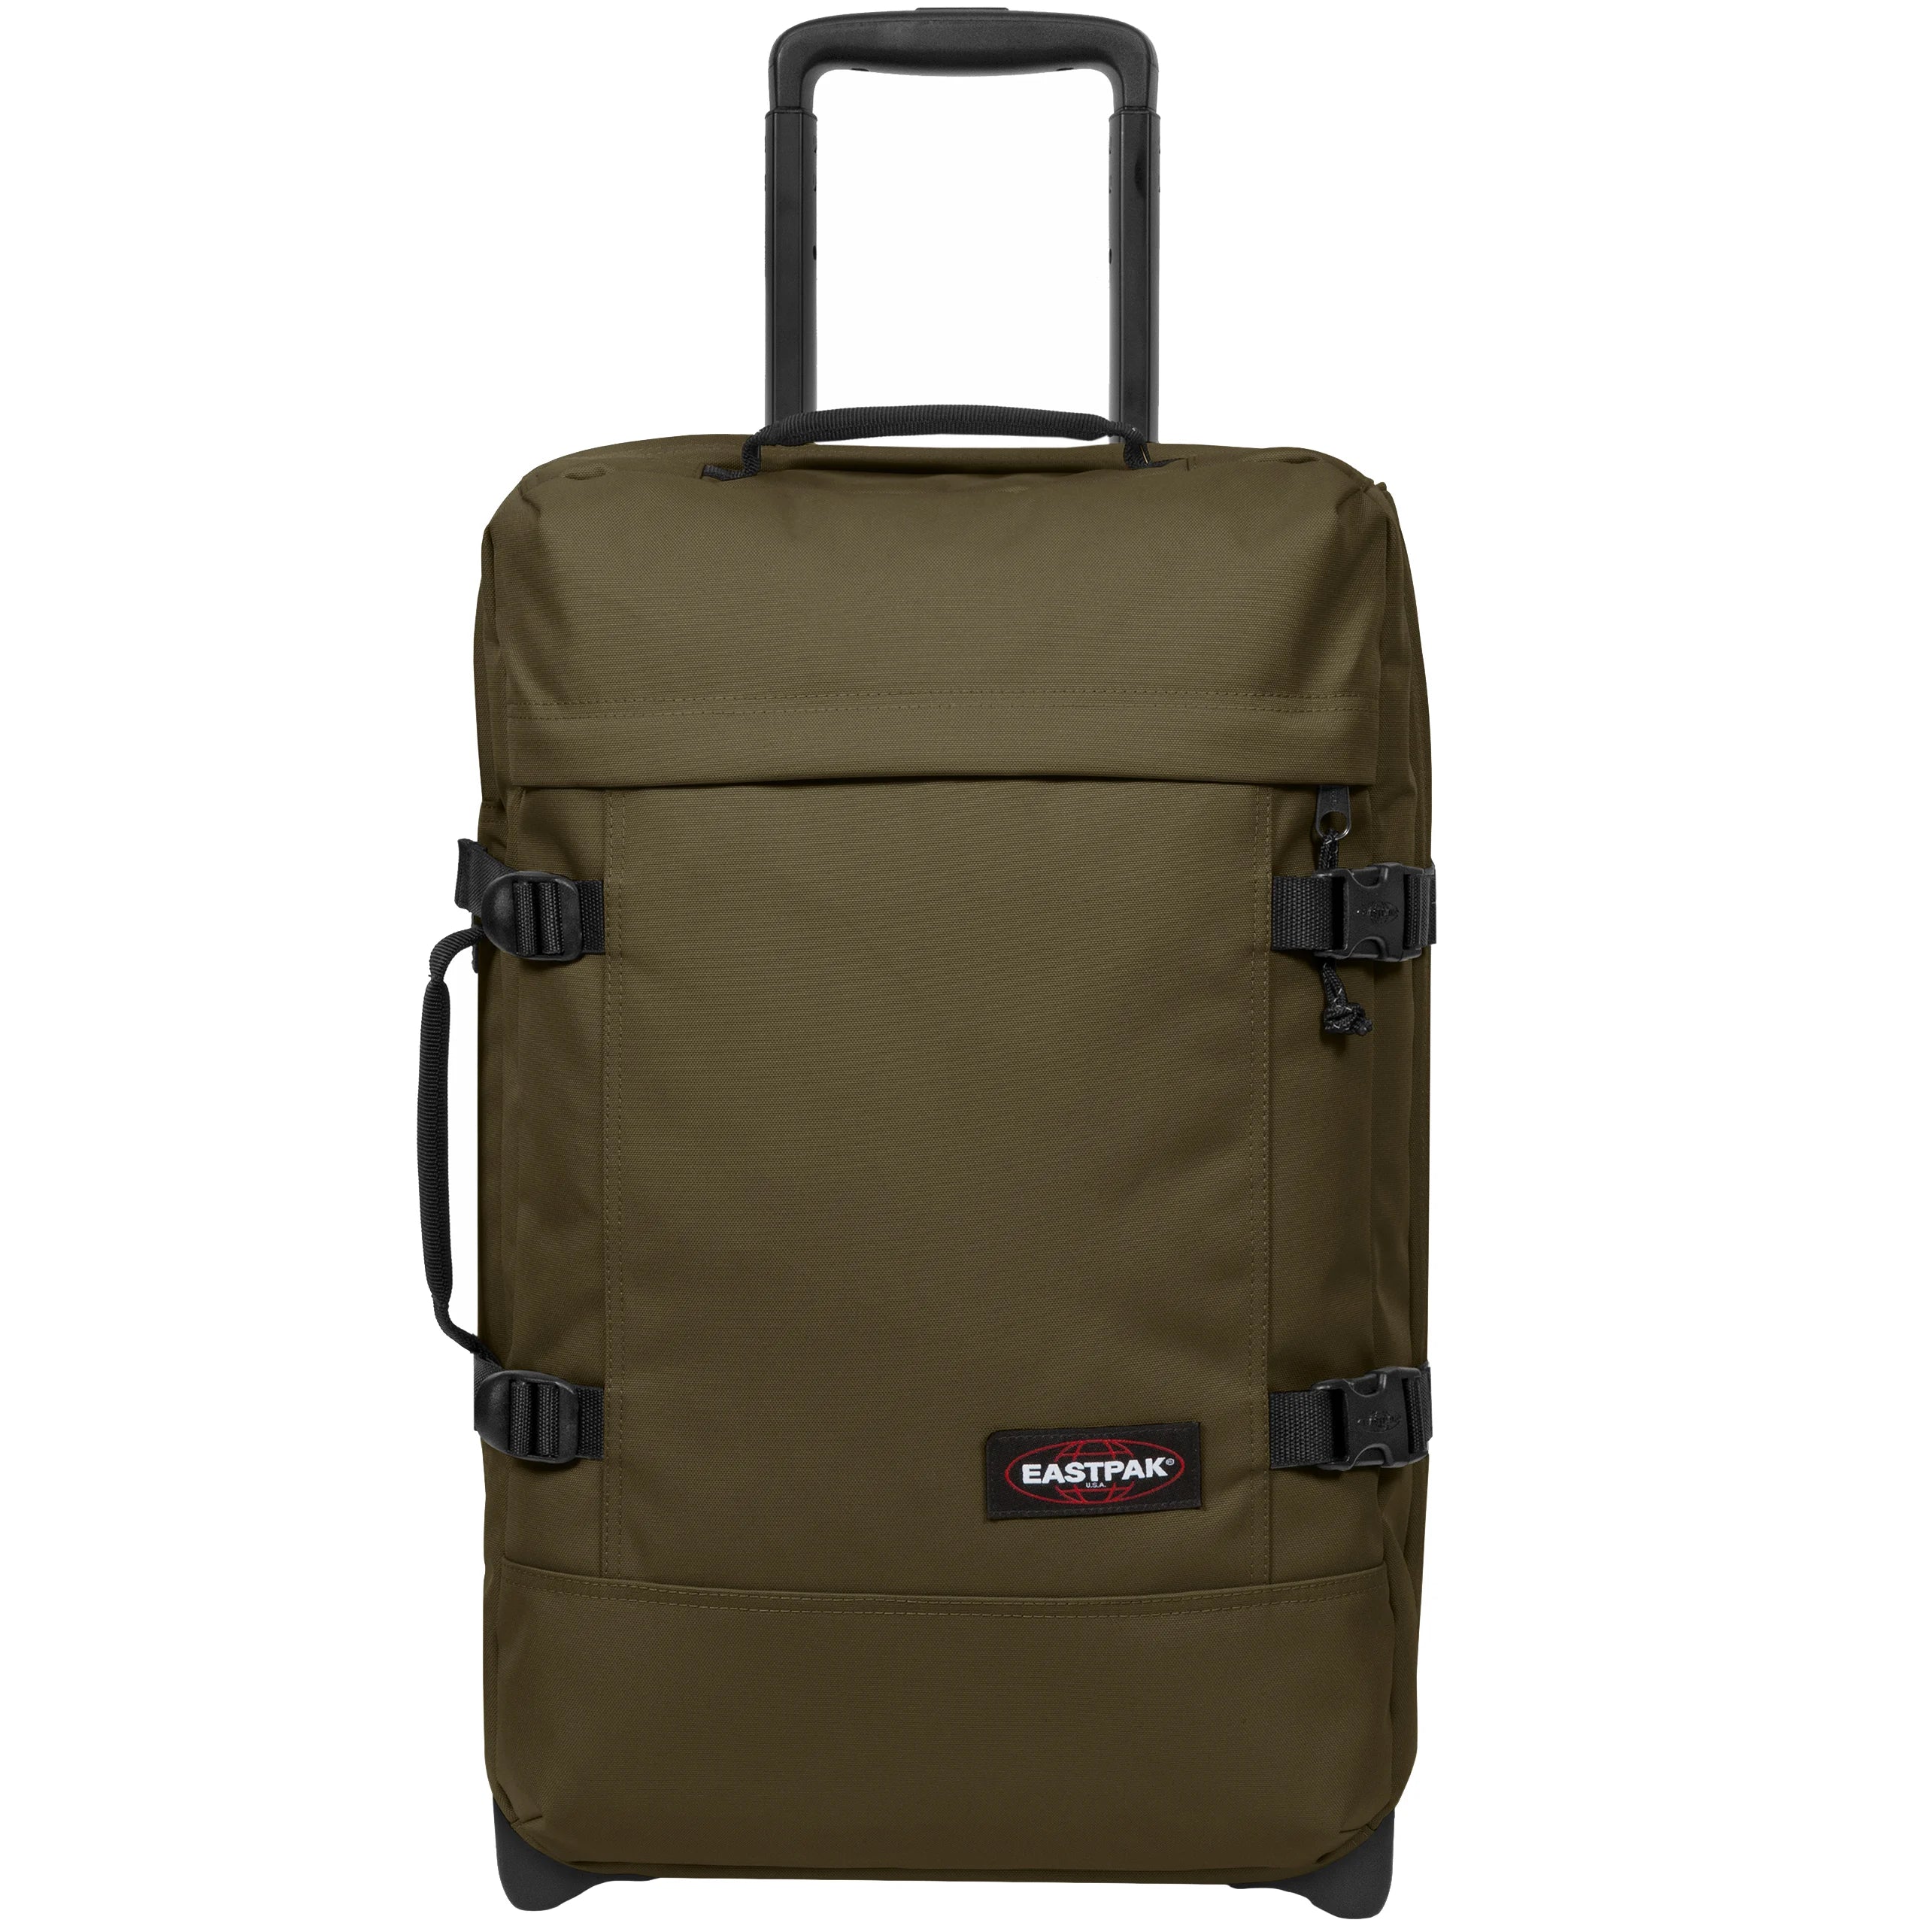 Eastpak Authentic Travel Tranverz Valise cabine 2 roues 51 cm - Army Olive